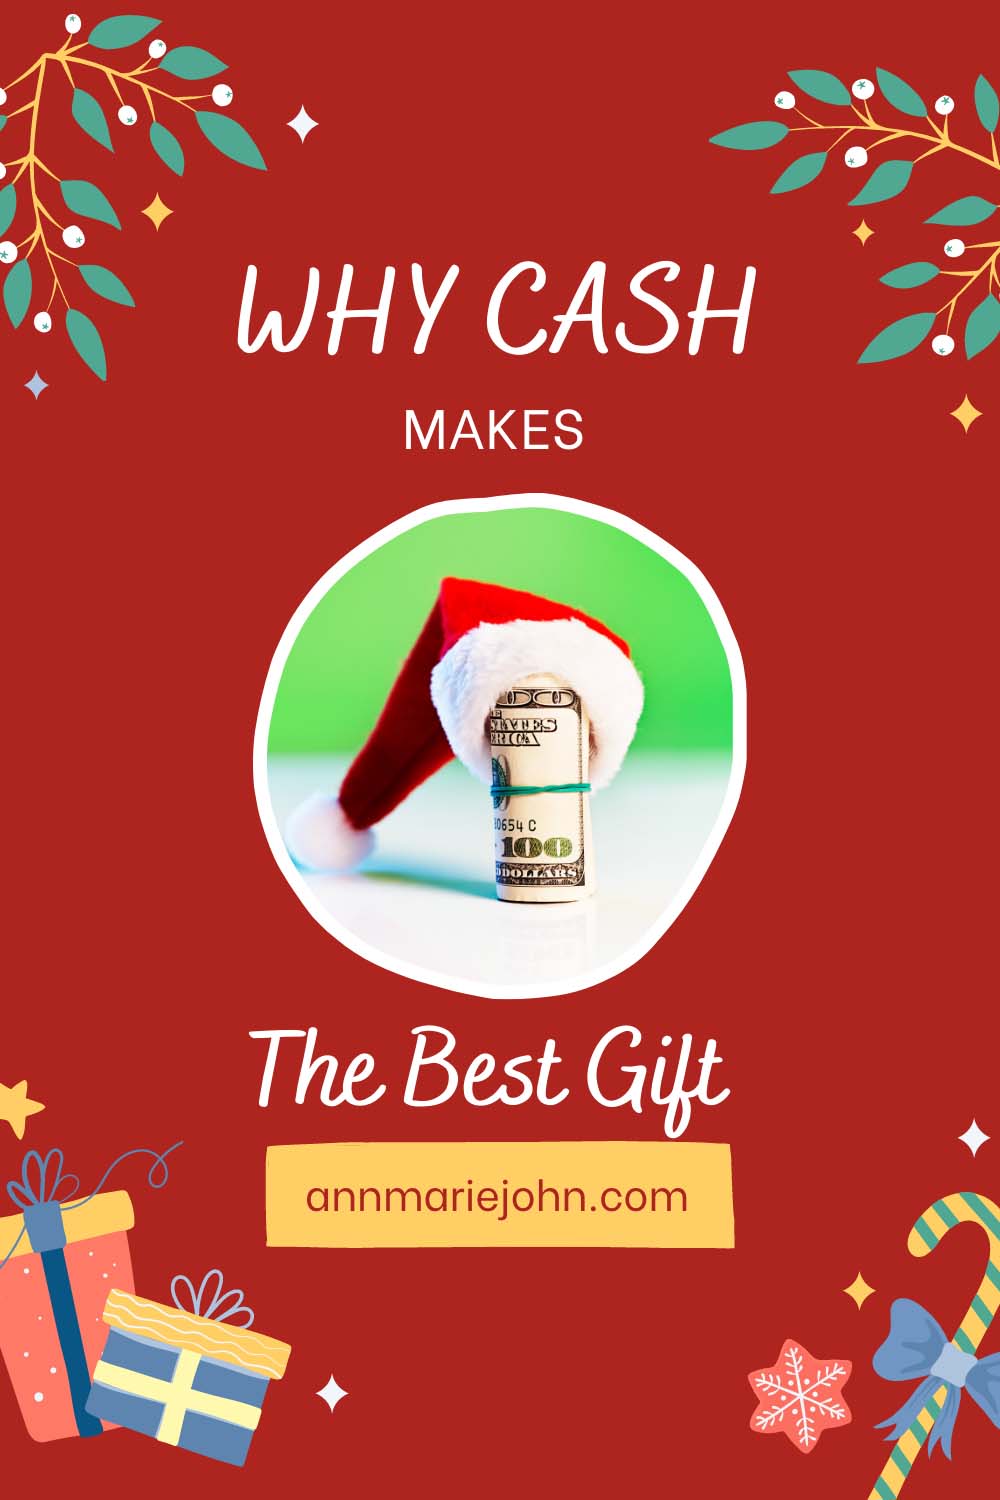 Why Cash Can Make the Best Gift